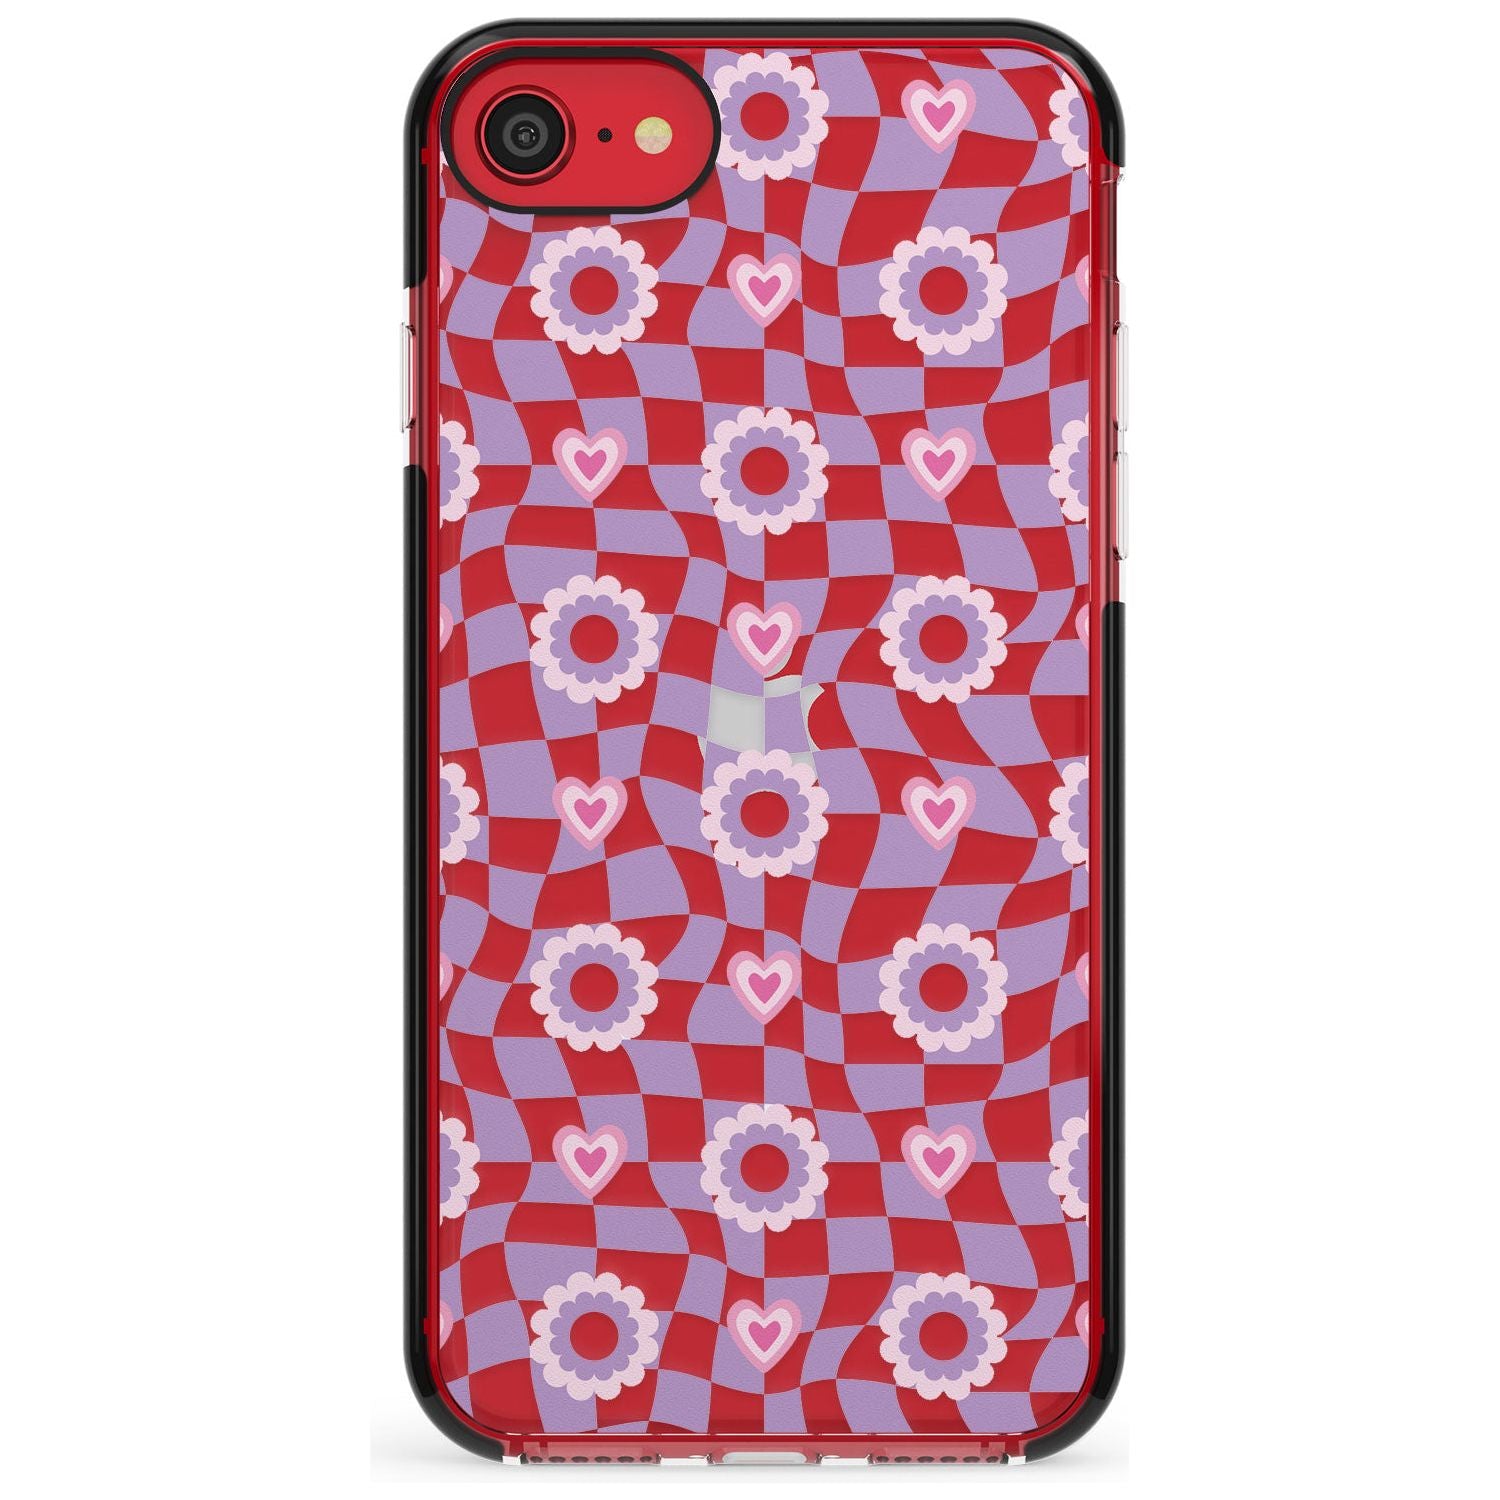 Checkered Love Pattern Black Impact Phone Case for iPhone SE 8 7 Plus